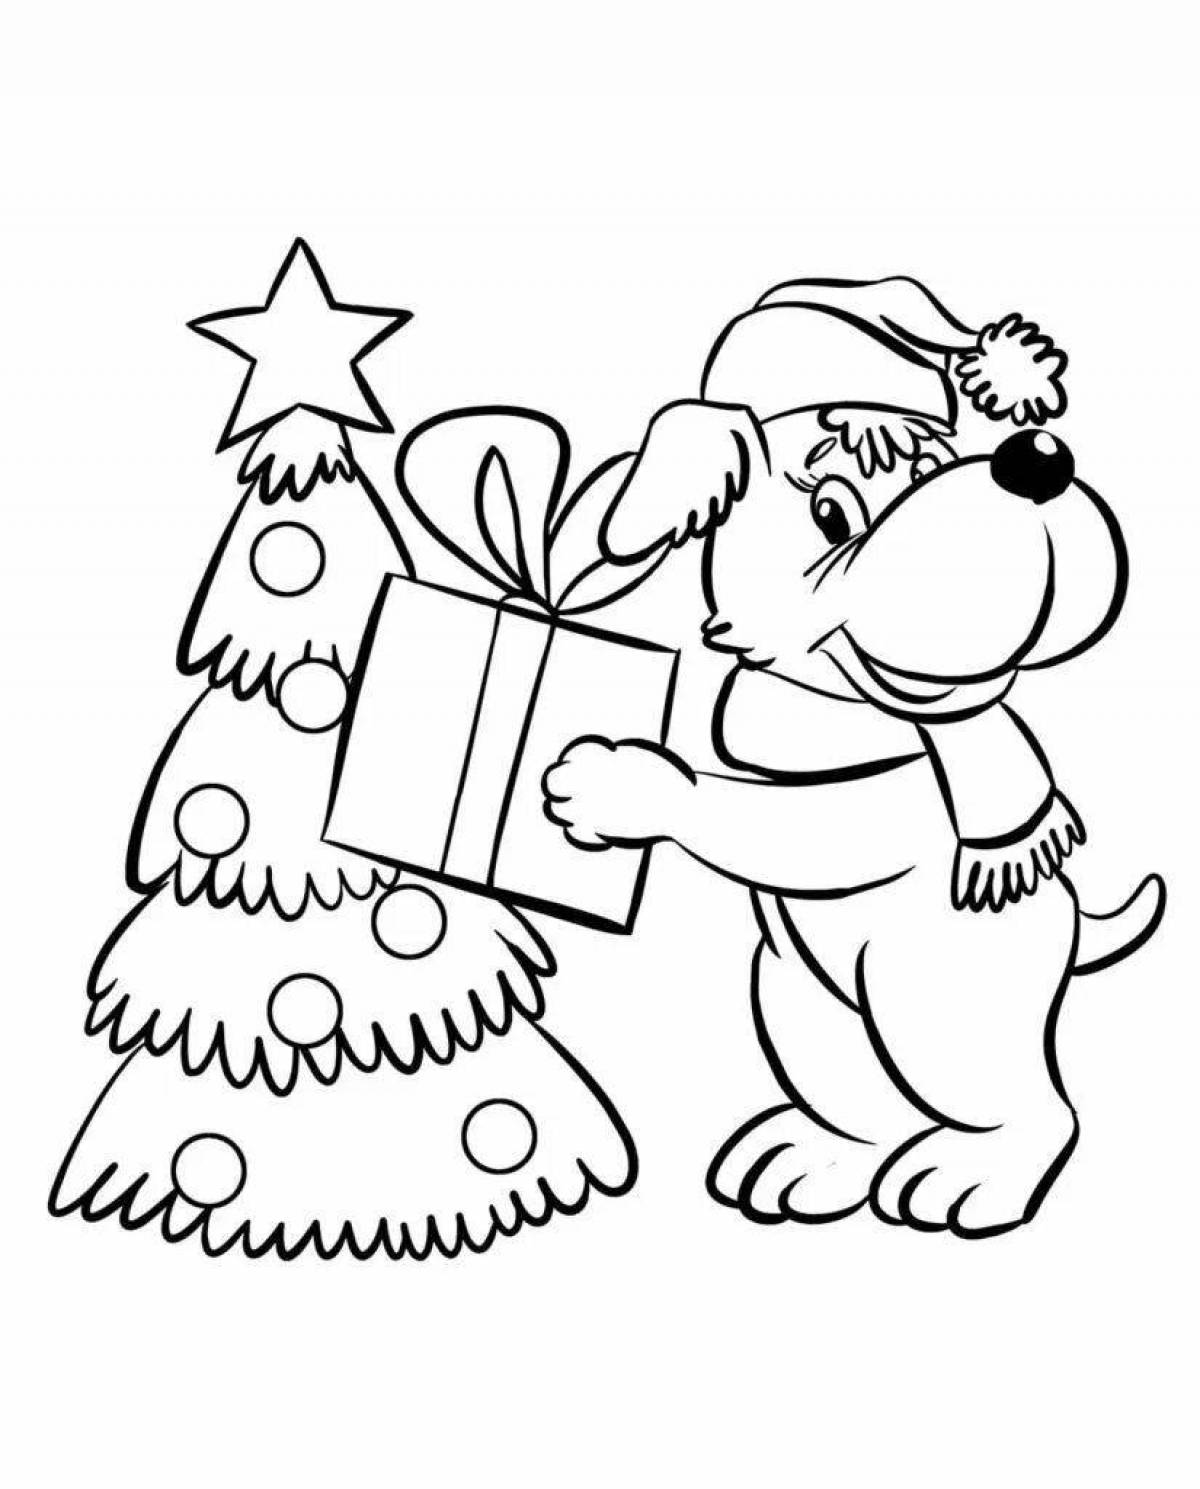 Fancy coloring pages with christmas animals